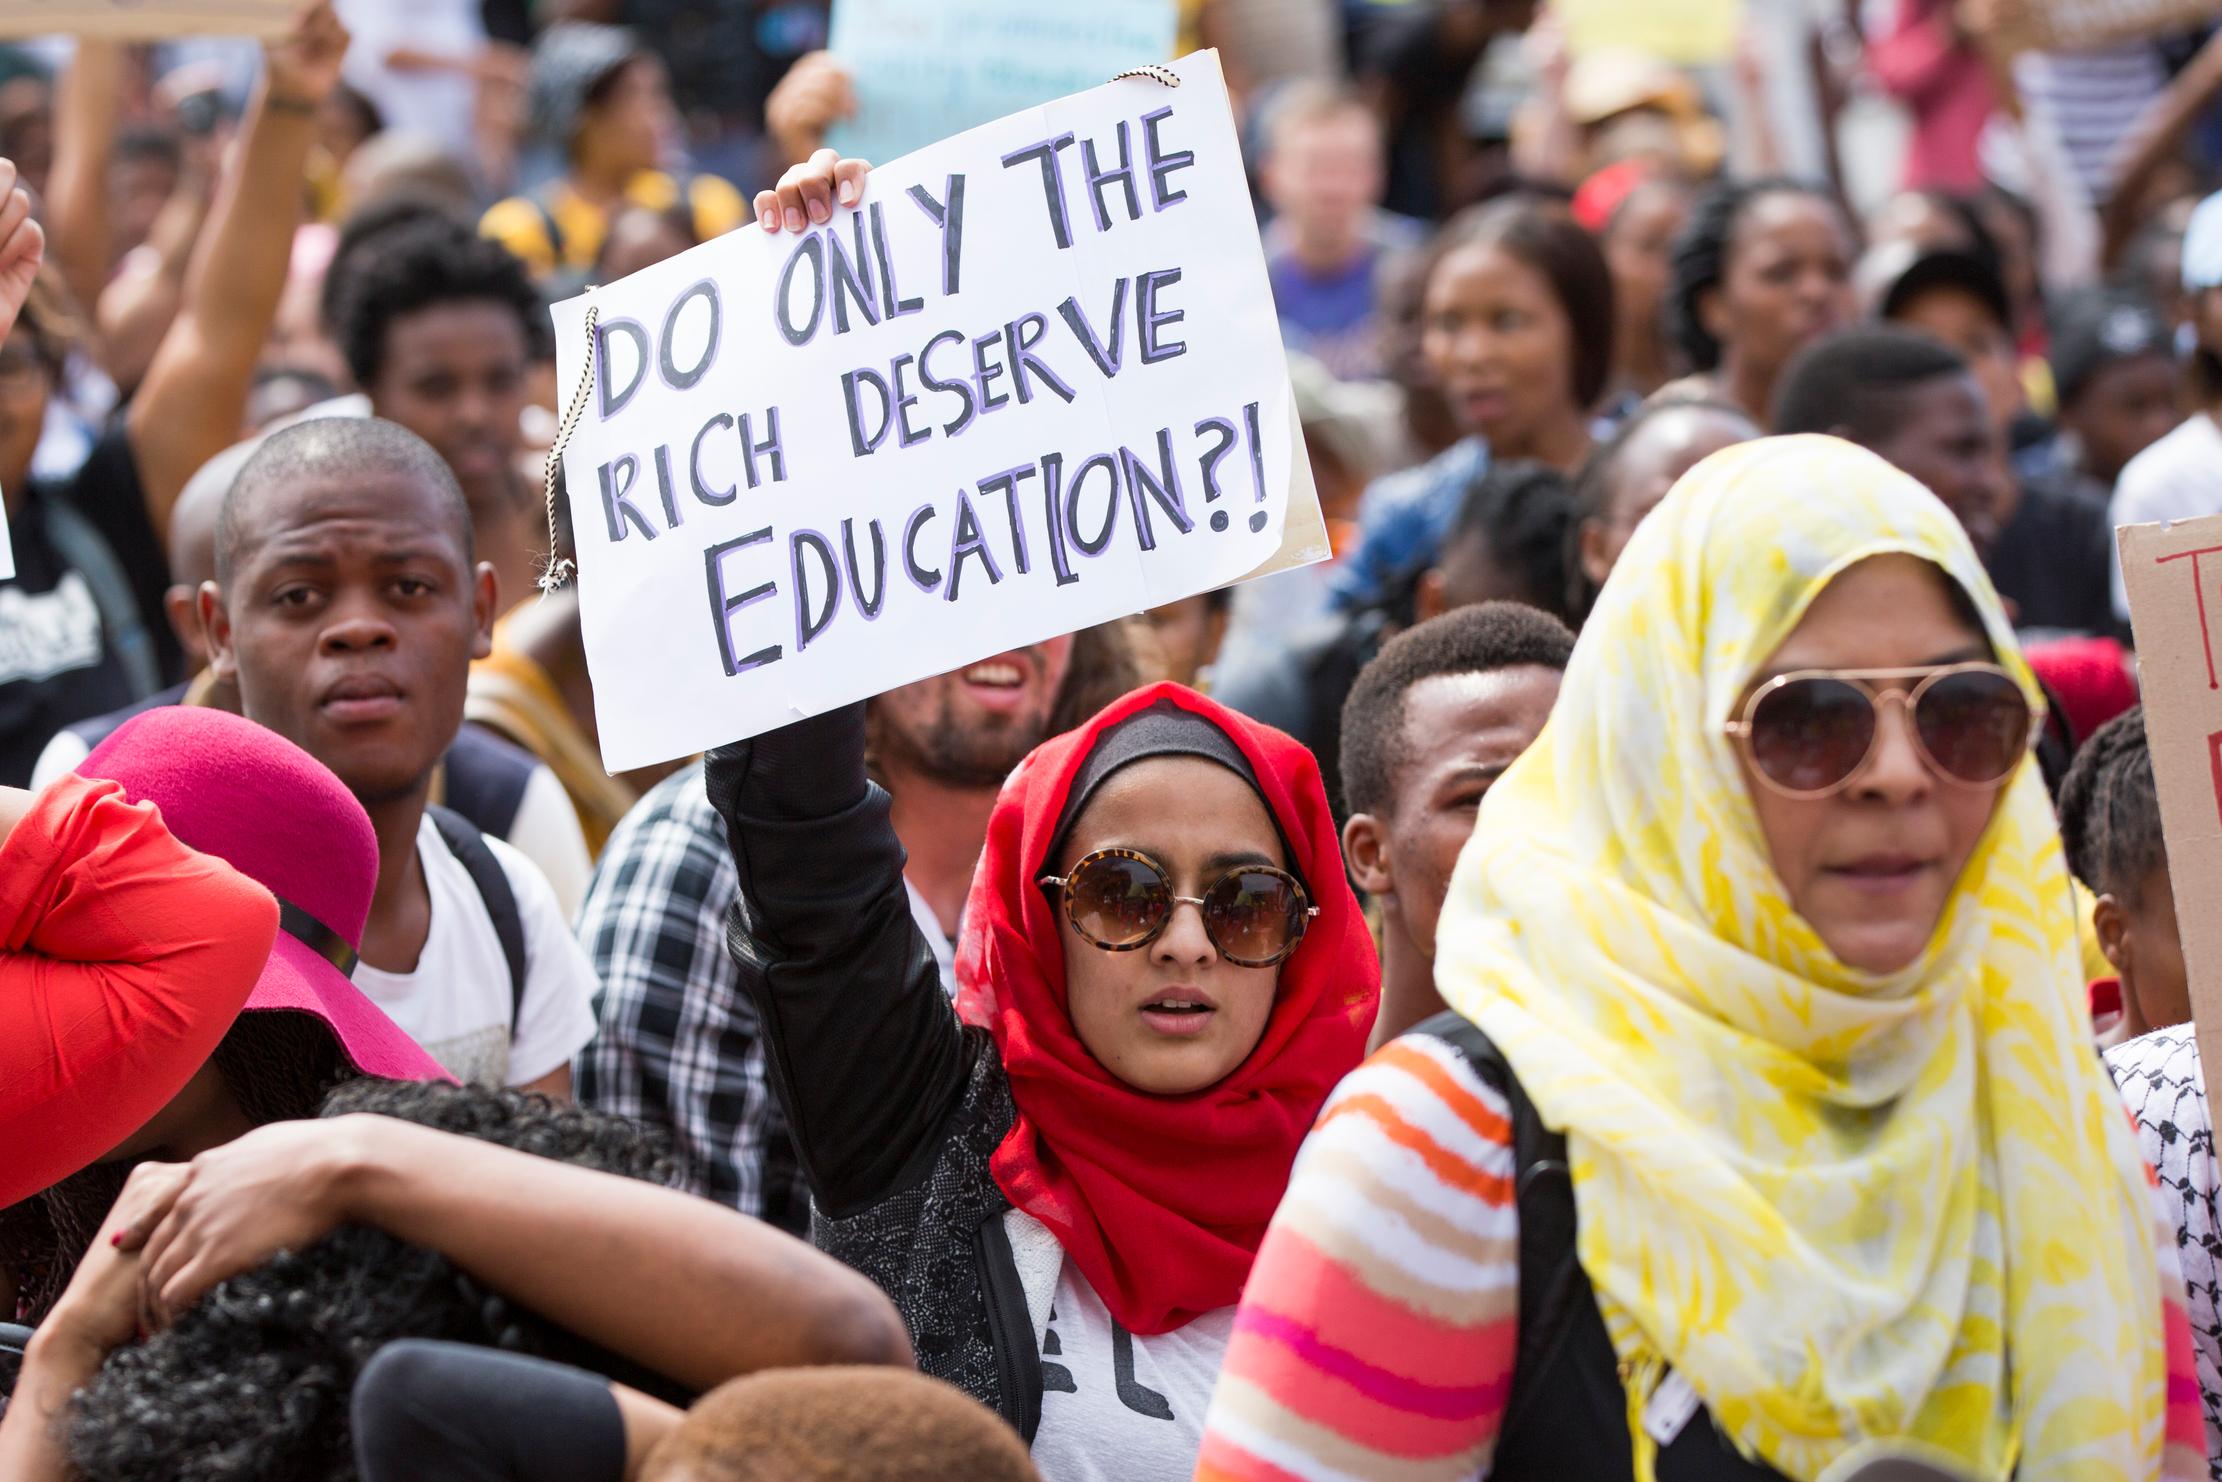 A woman in a large crowd holds a sign questioning whether only the rich deserve education.